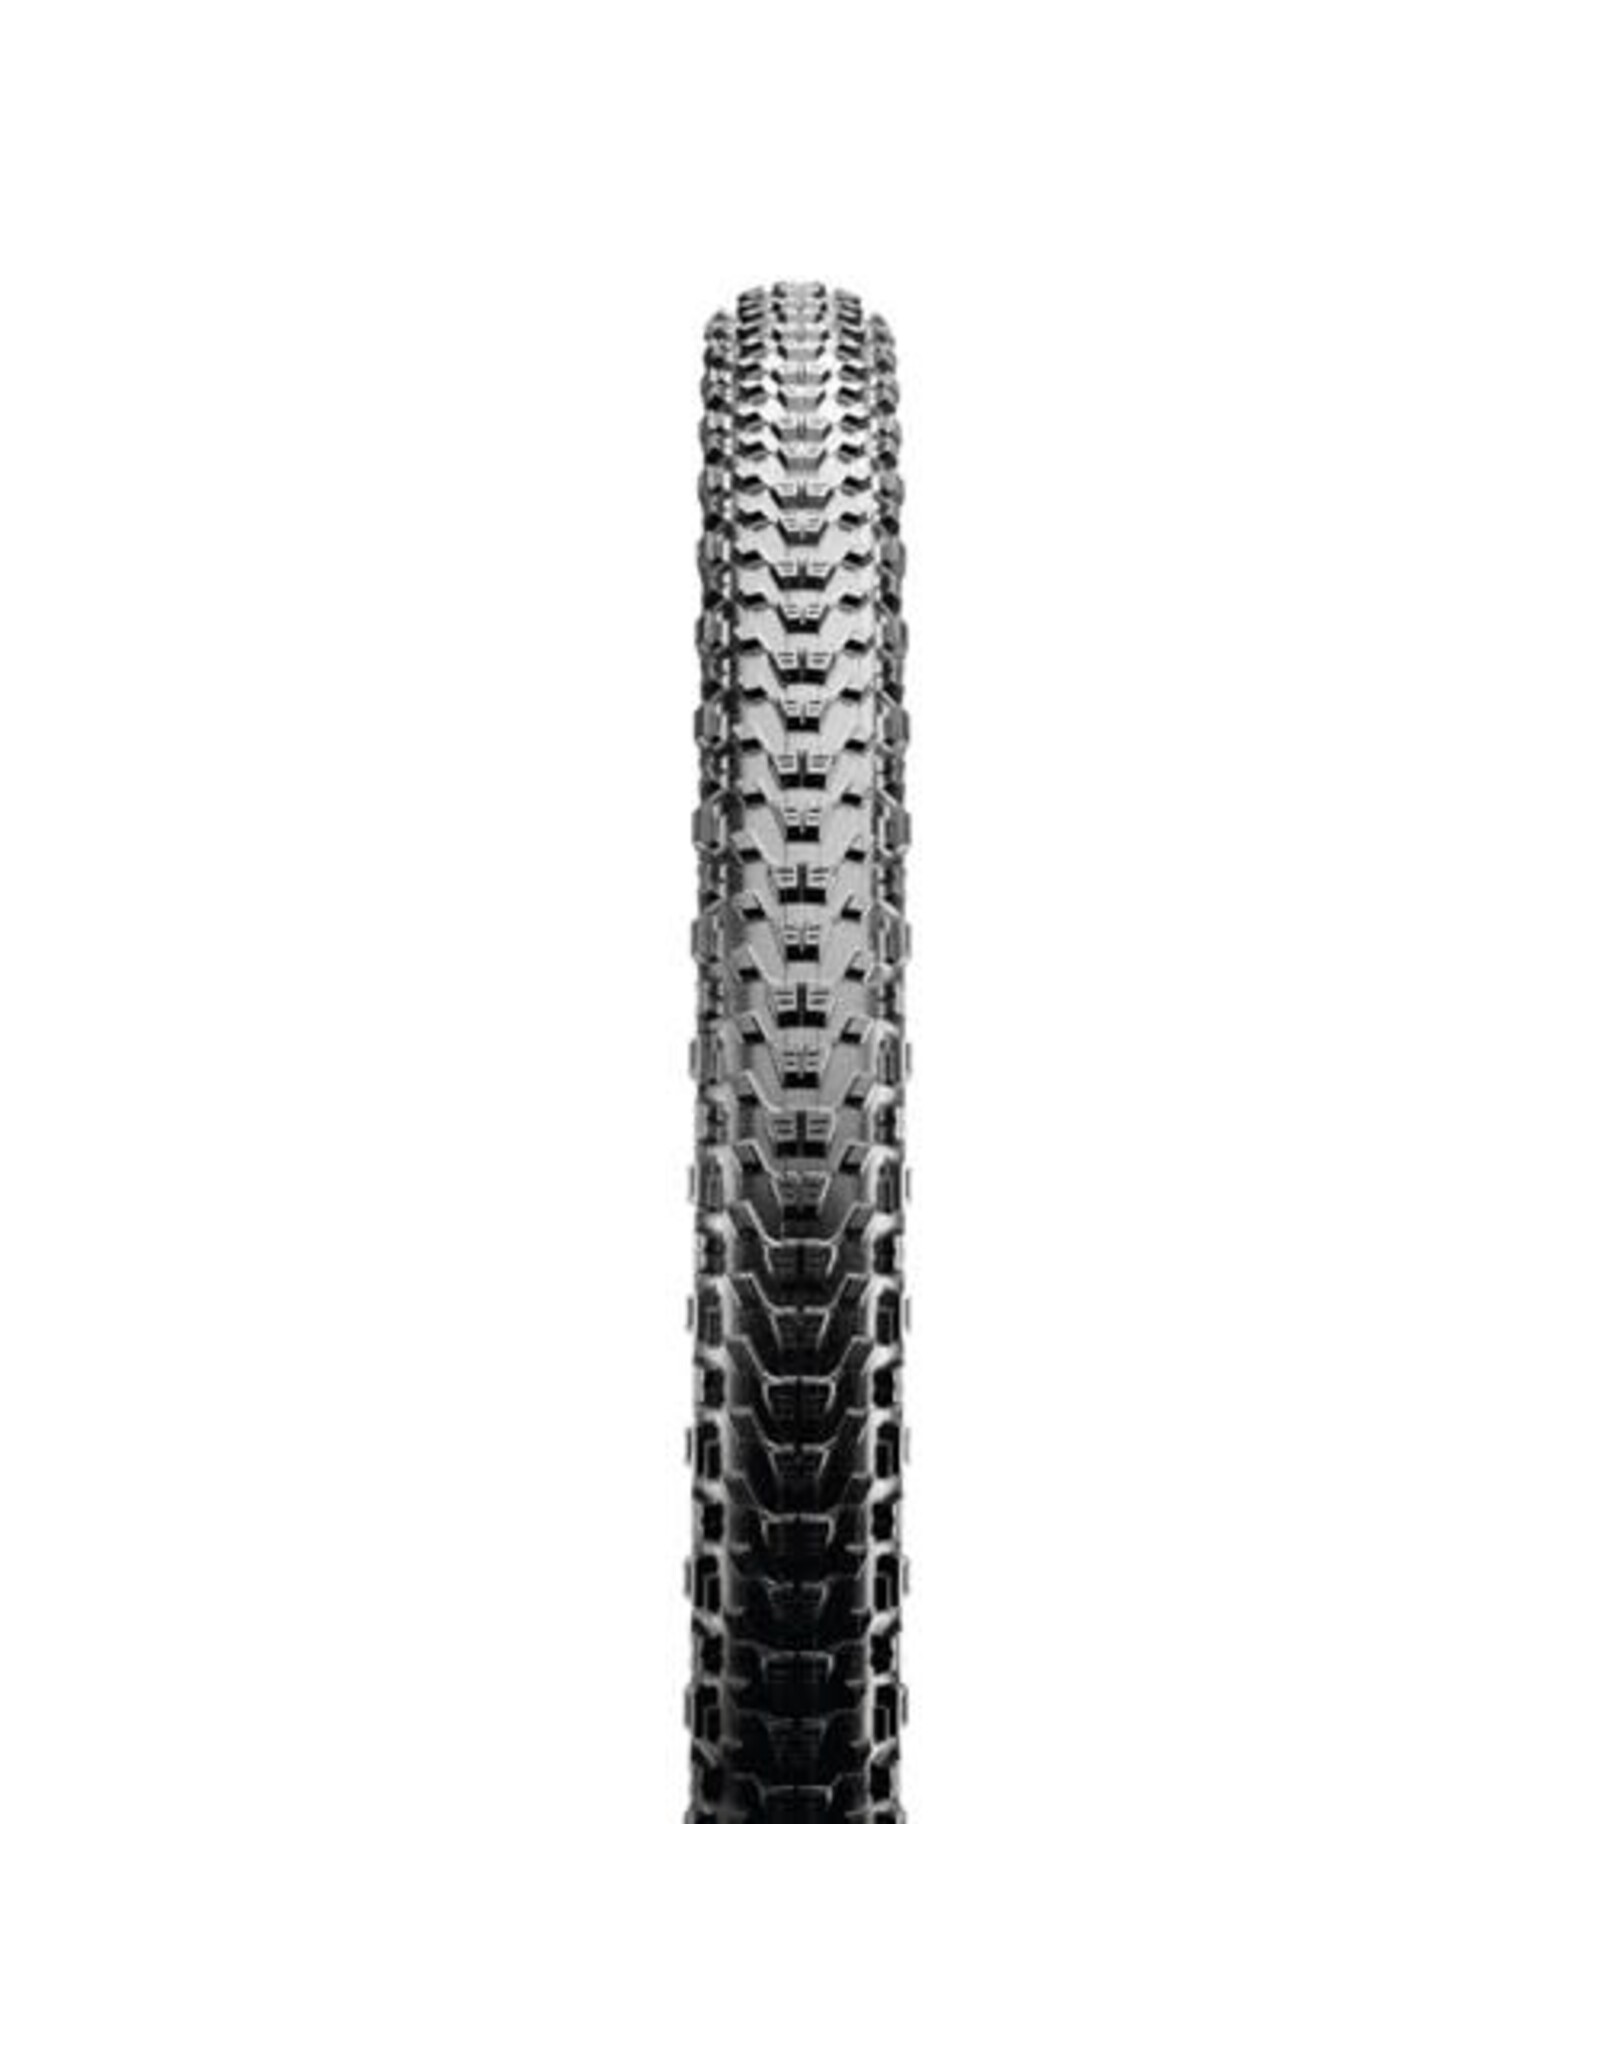 MAXXIS MAXXIS ARDENT RACE 29 X 2.20” TR EXO FOLD 60TPI TYRE